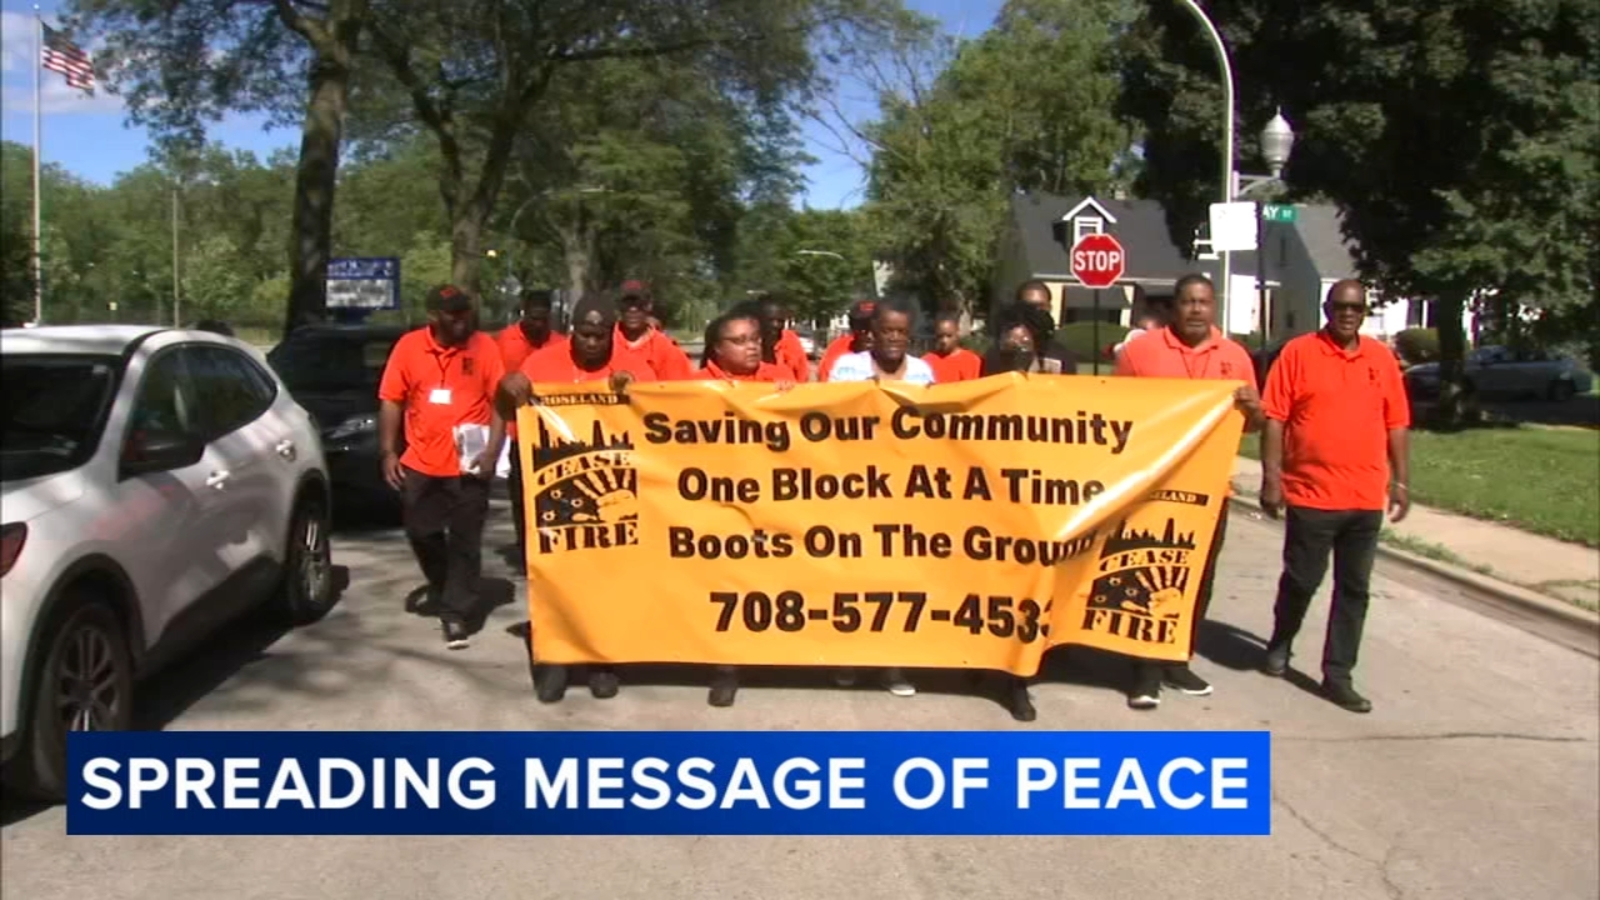 Chicago crime stats appear down as nonprofit marches down South Side streets in call to reduce violence in Roseland, Park Manor [Video]